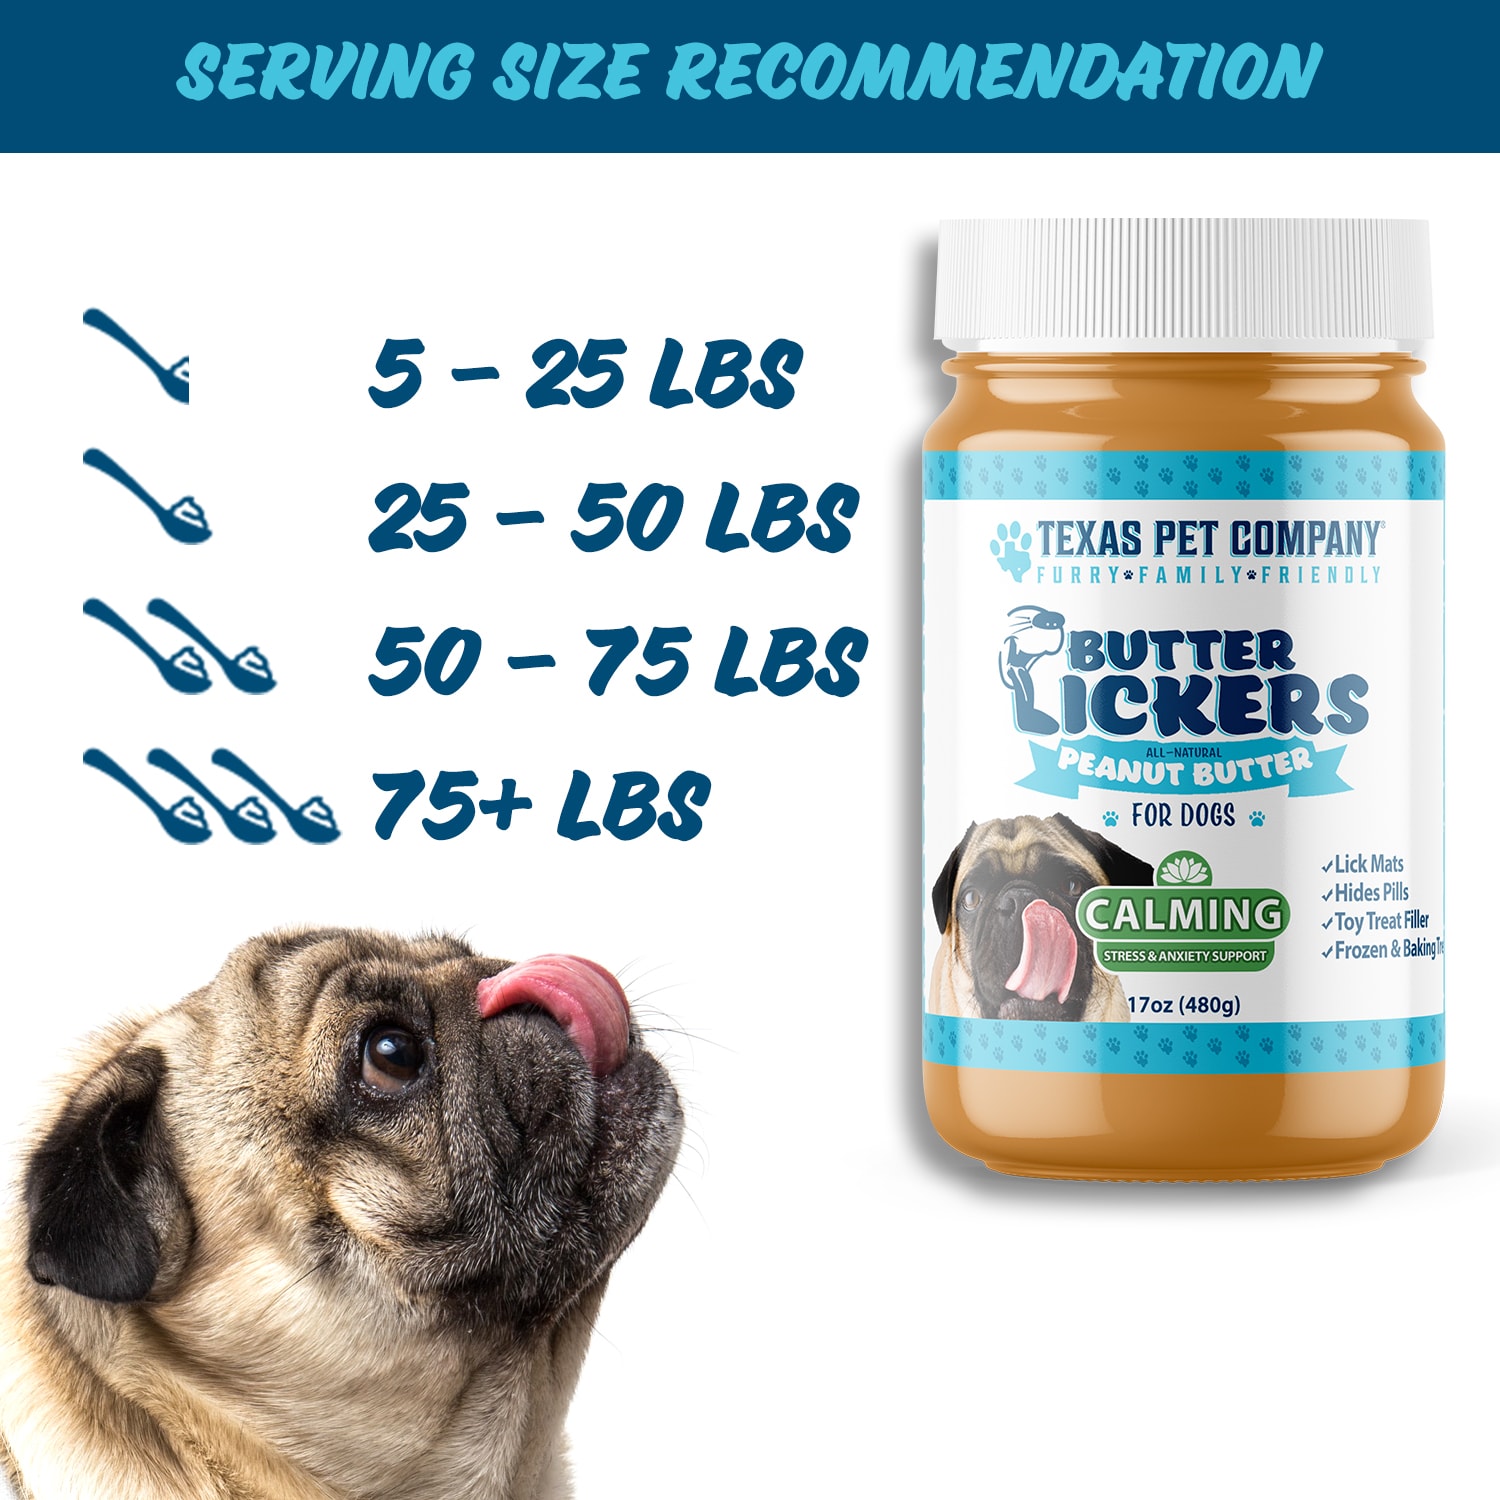 https://texaspetcompany.com/wp-content/uploads/2022/01/Butter-Lickers-Calming-Peanut-Butter-For-Dogs-Serving-Size.jpg